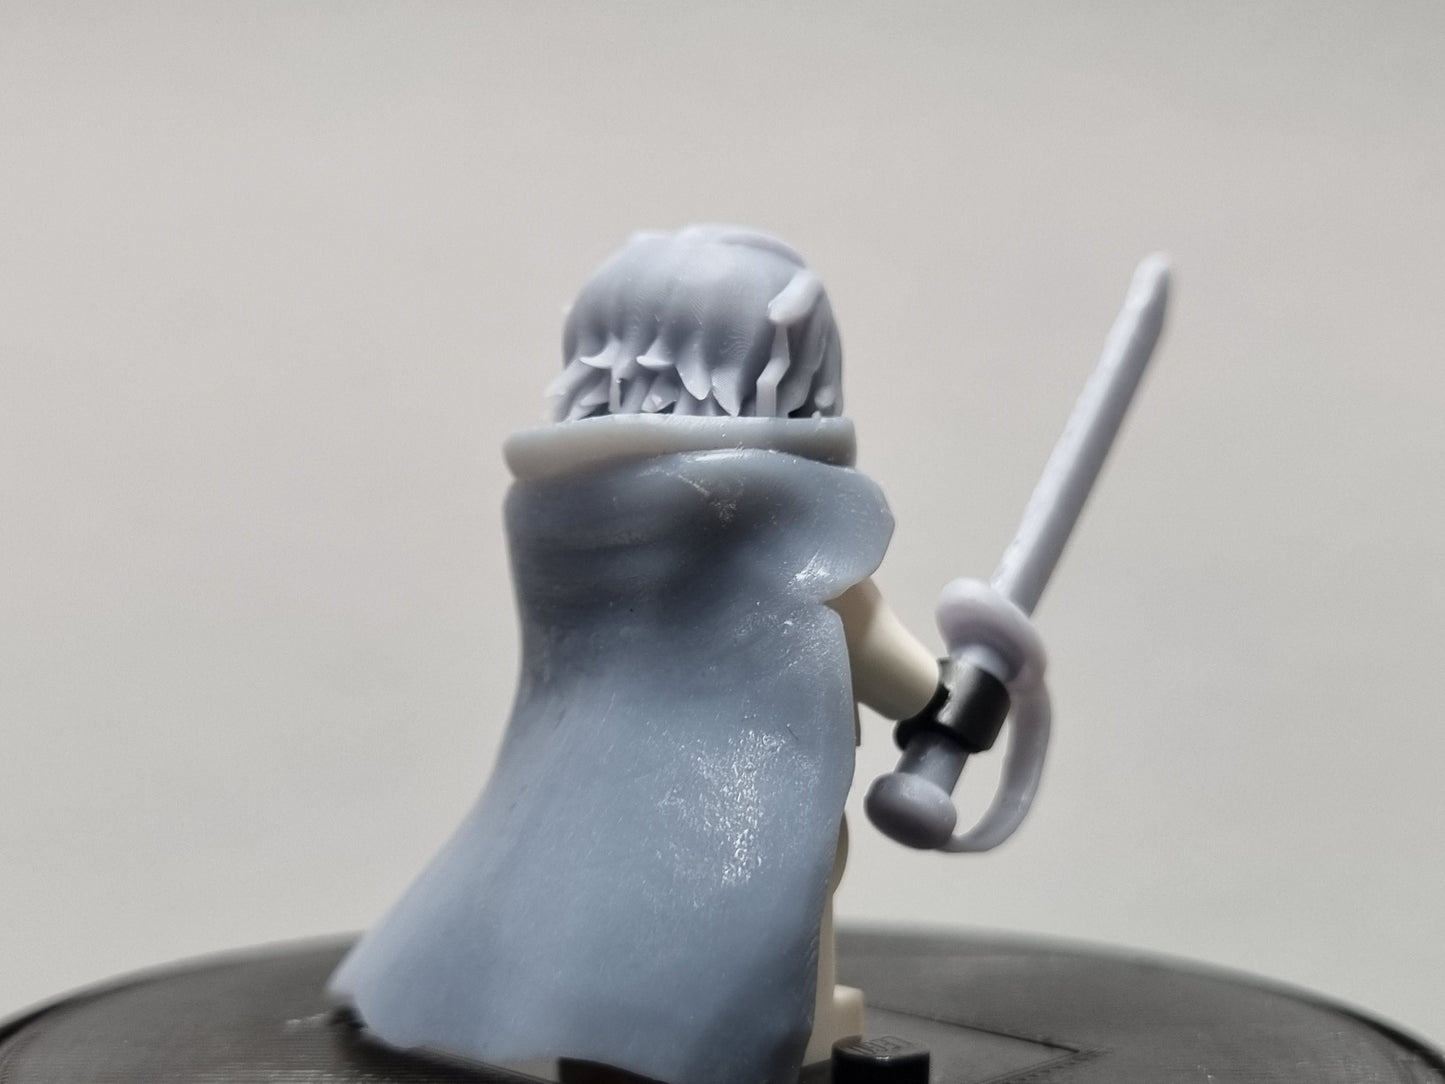 Building toy custom 3D printed one armed pirate!